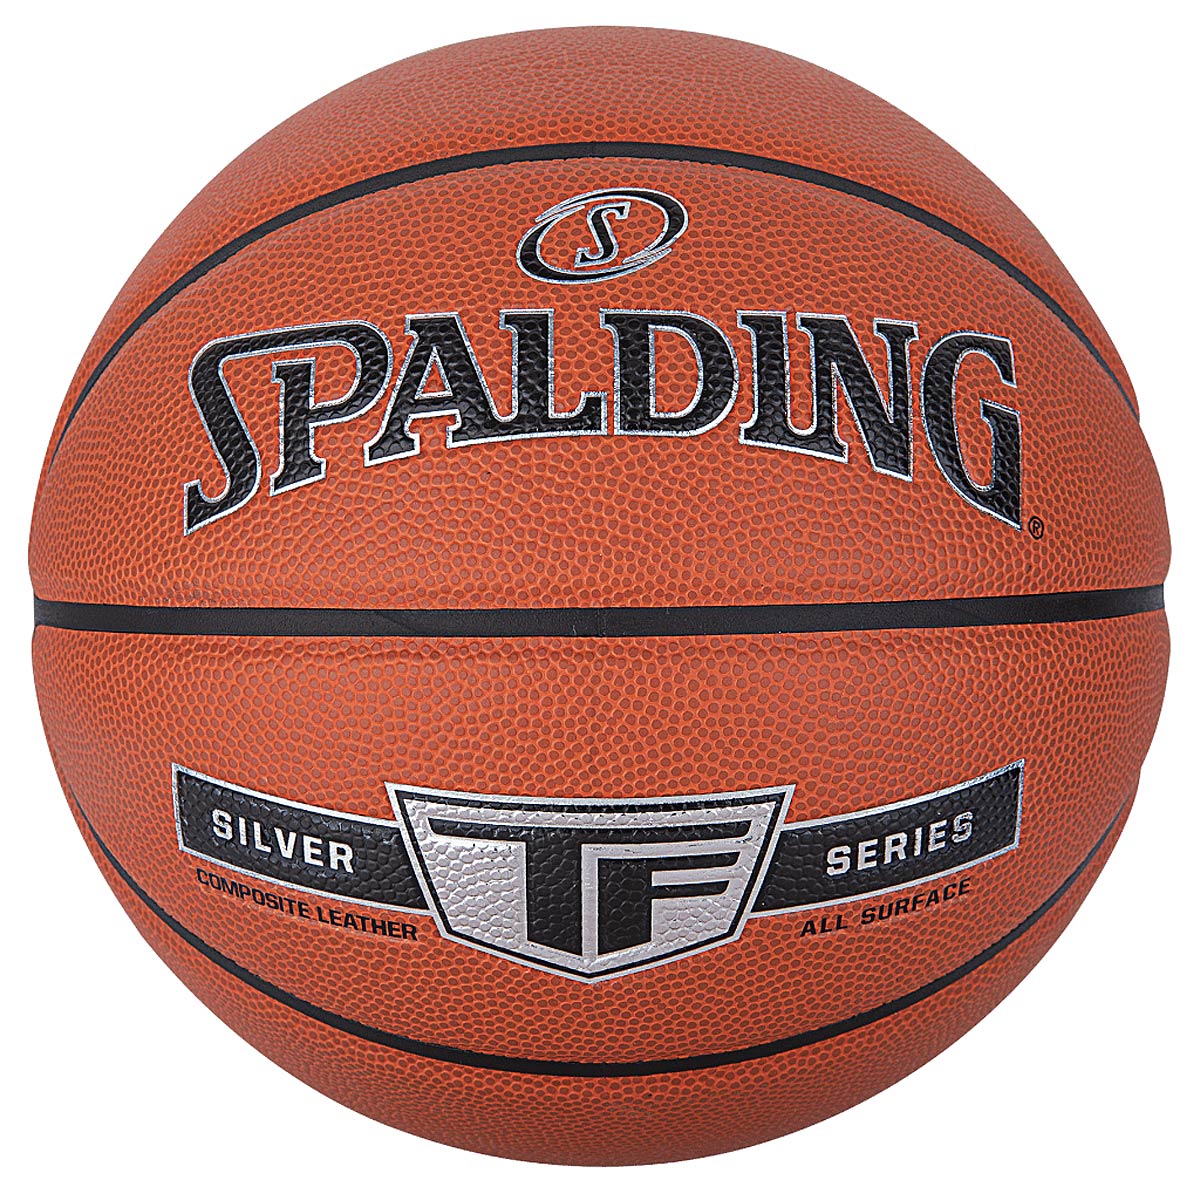 Image of Spalding Tf Silver Sz7 Composite Basketball, Brown